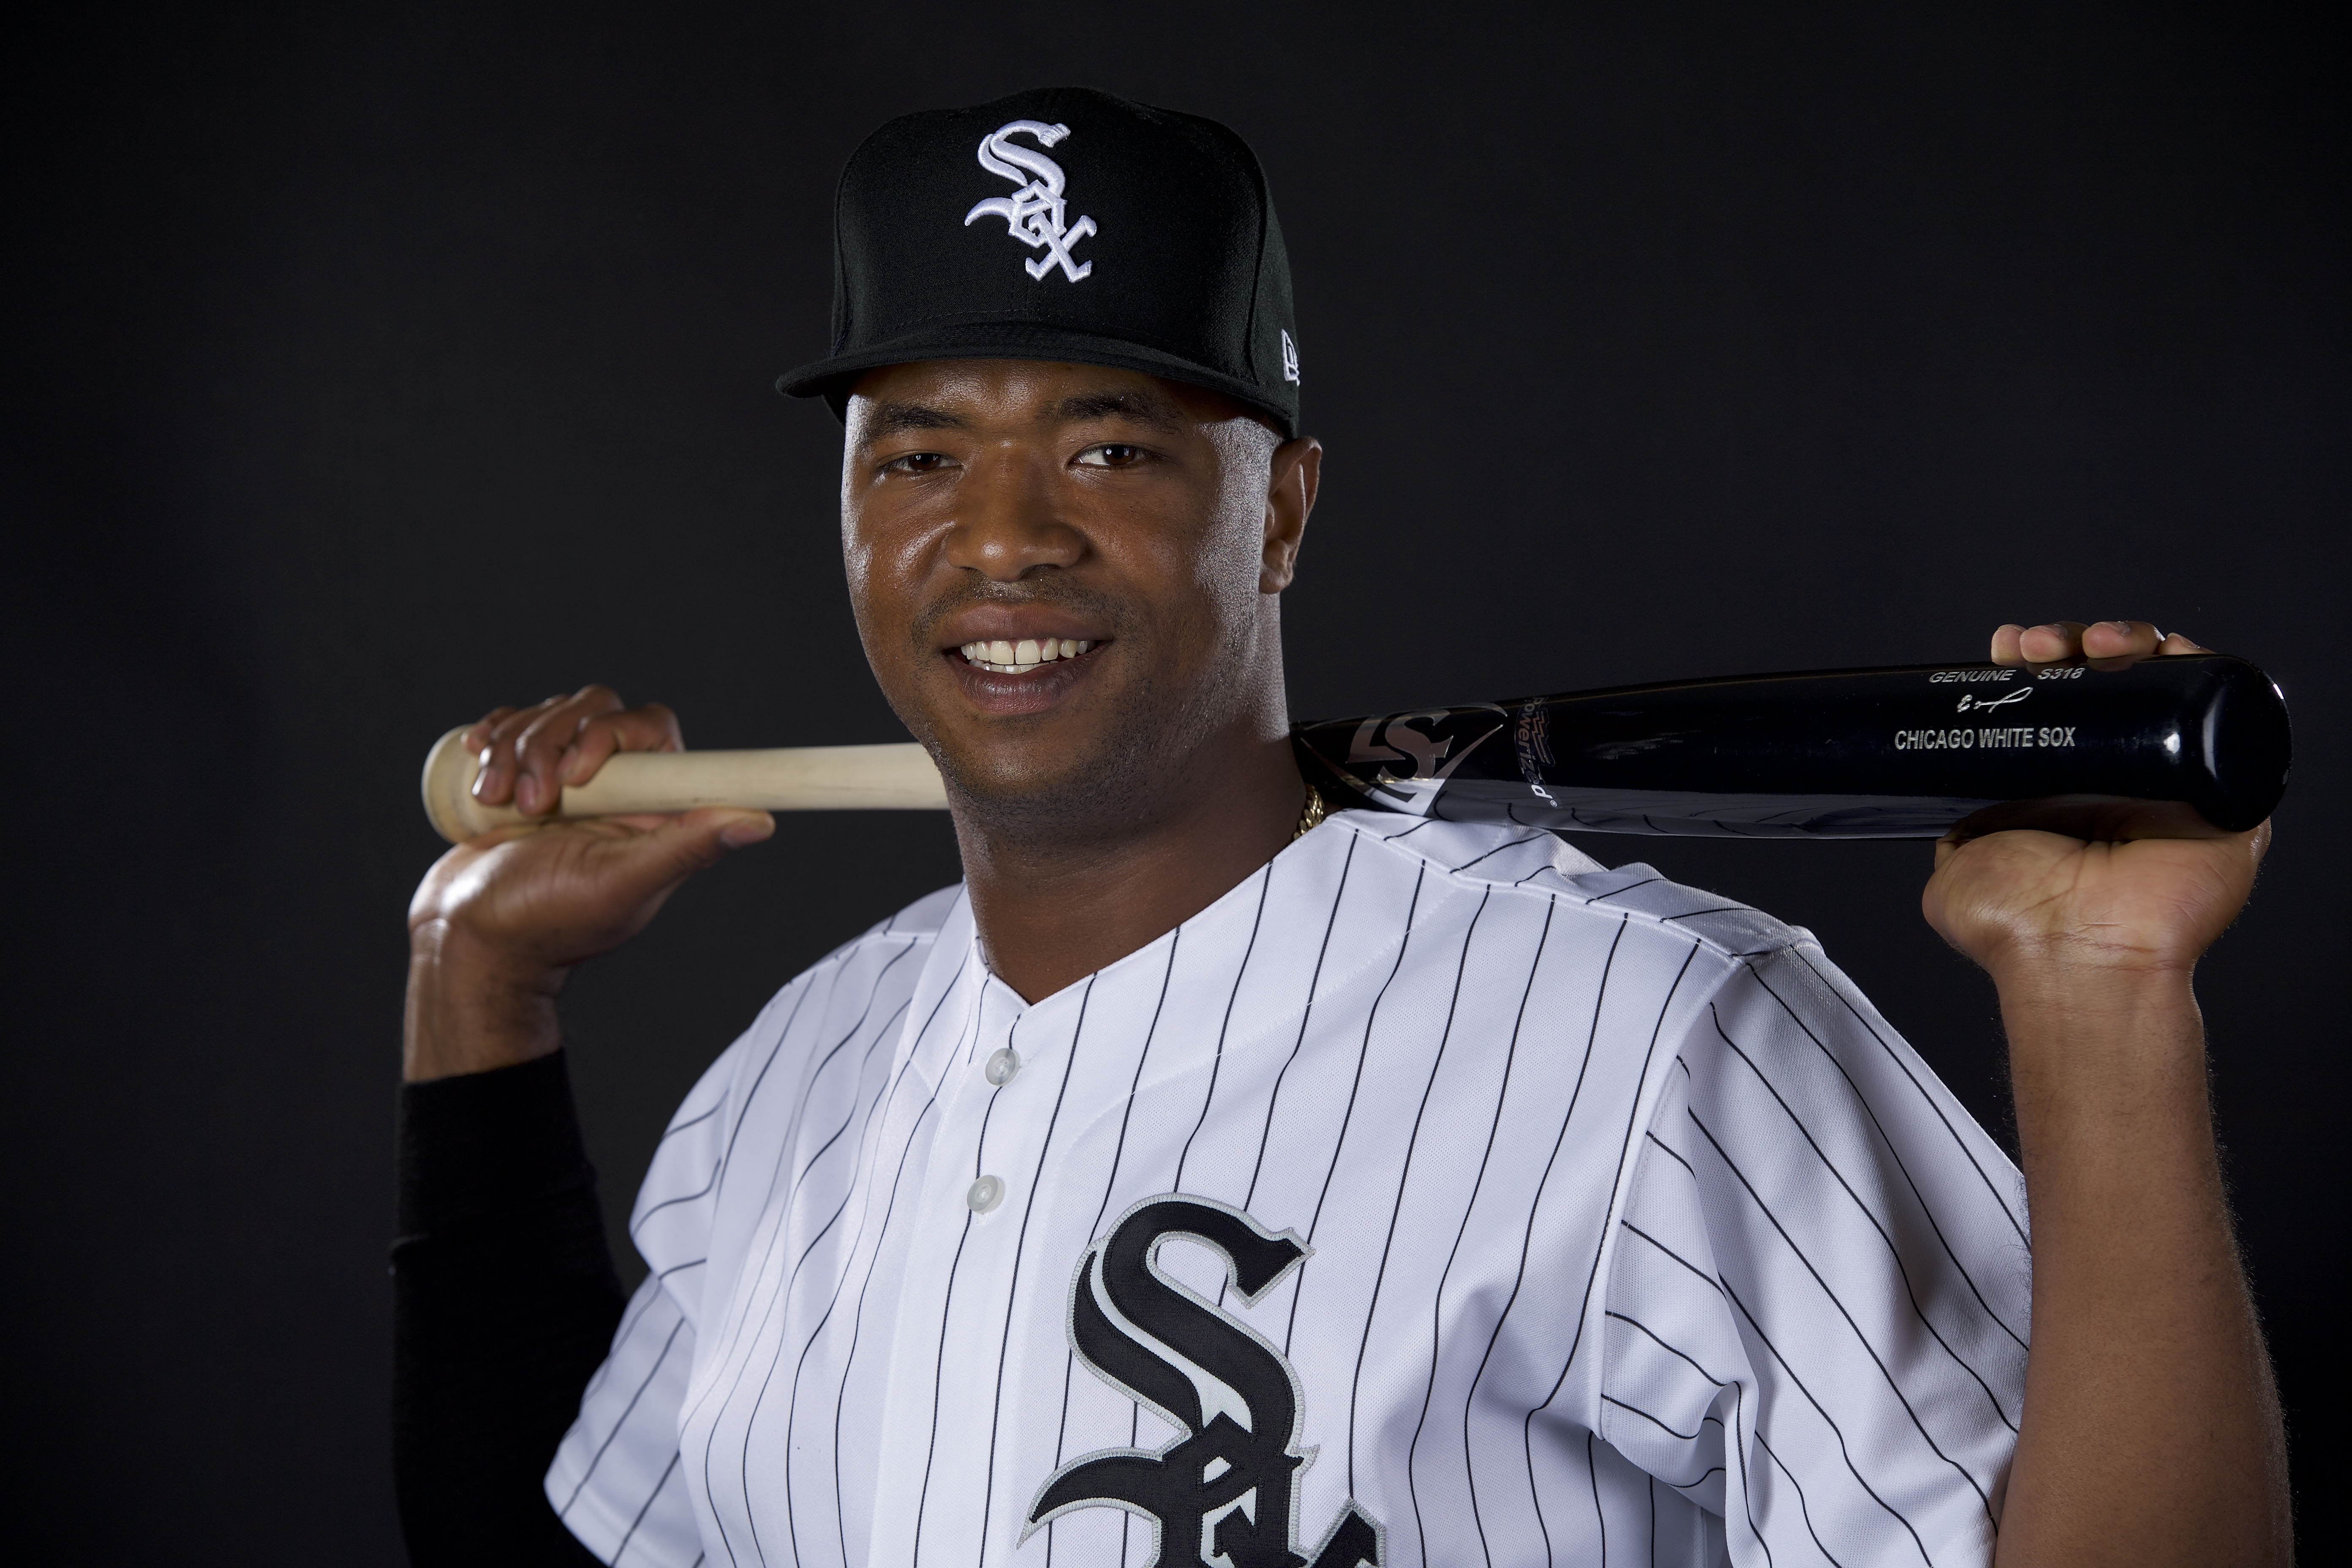 Chicago Cubs name Eloy Jimenez minor league player of the year